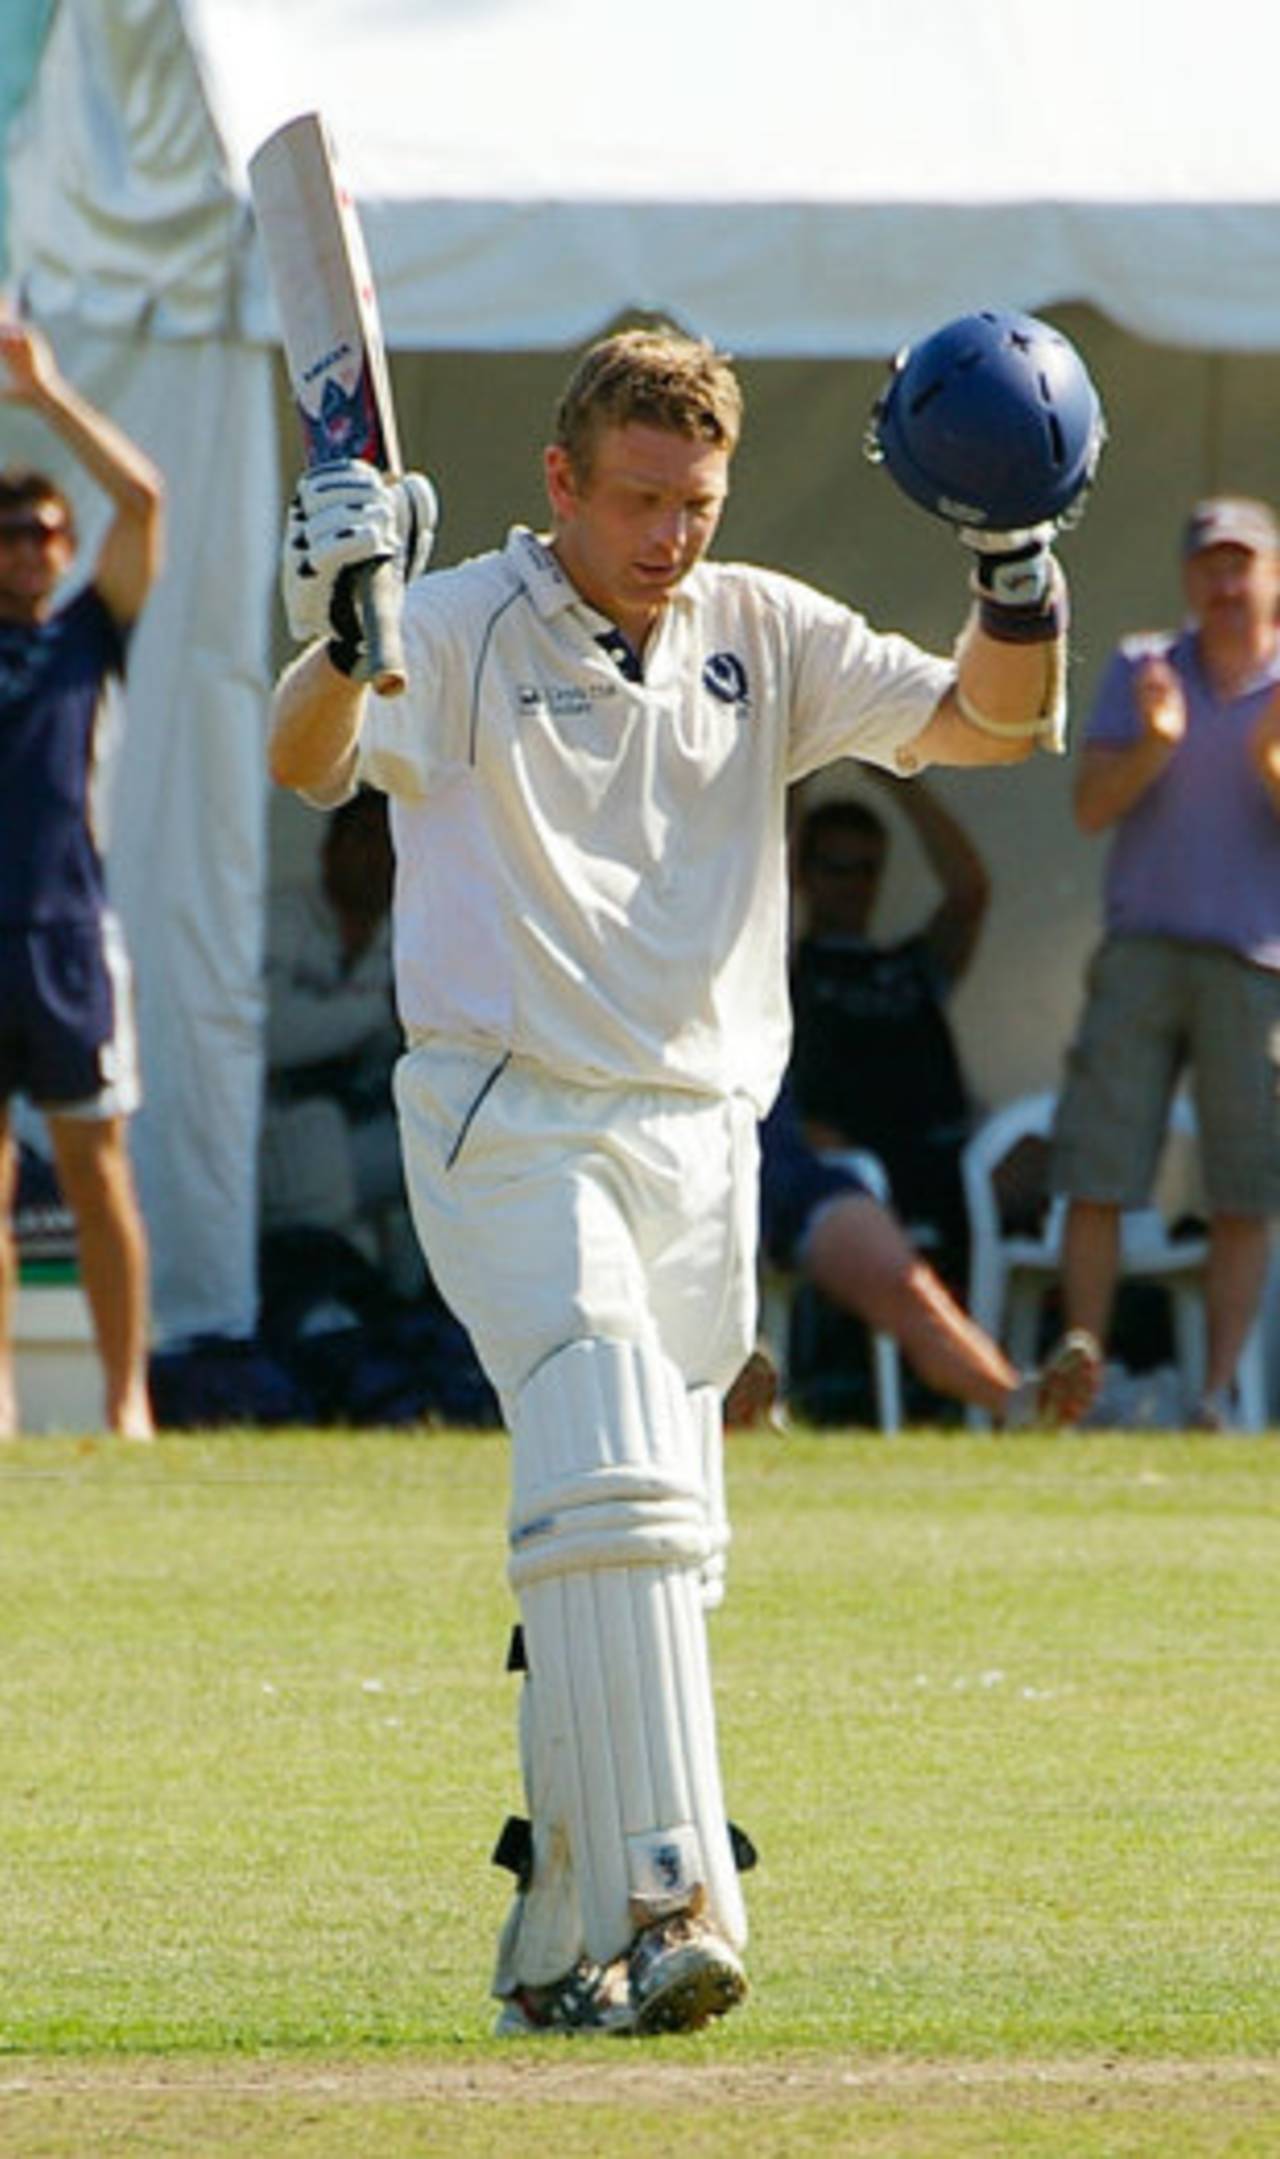 Dougie Lockhart celebrates his hundred on his way to a career-best 151 against Canada in the Intercontinental Cup in 2008&nbsp;&nbsp;&bull;&nbsp;&nbsp;Eddie Norfolk